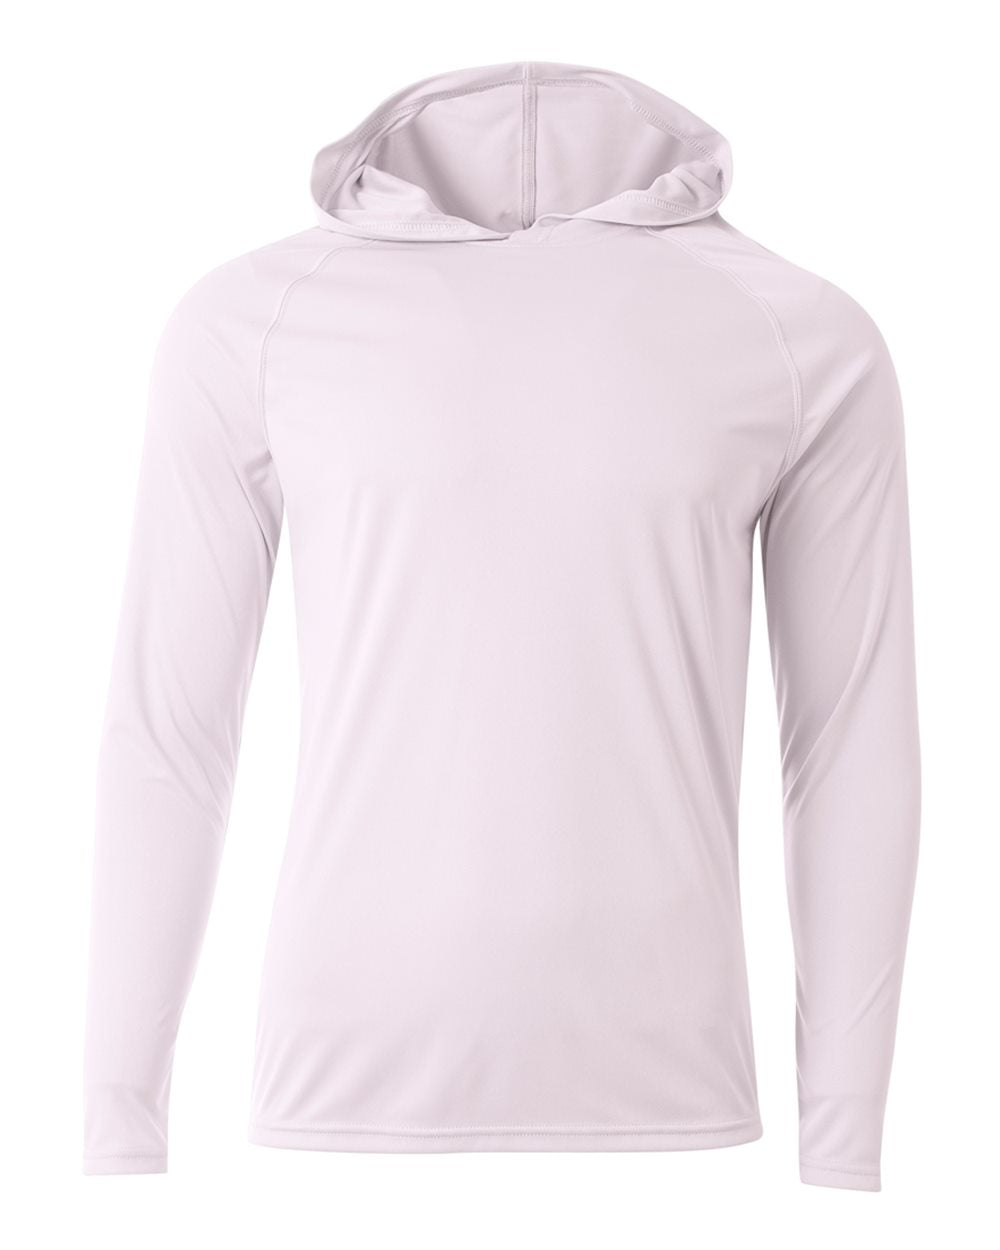 A4 N3409 Men's Cooling Performance Long-Sleeve Hooded T-Shirt, White